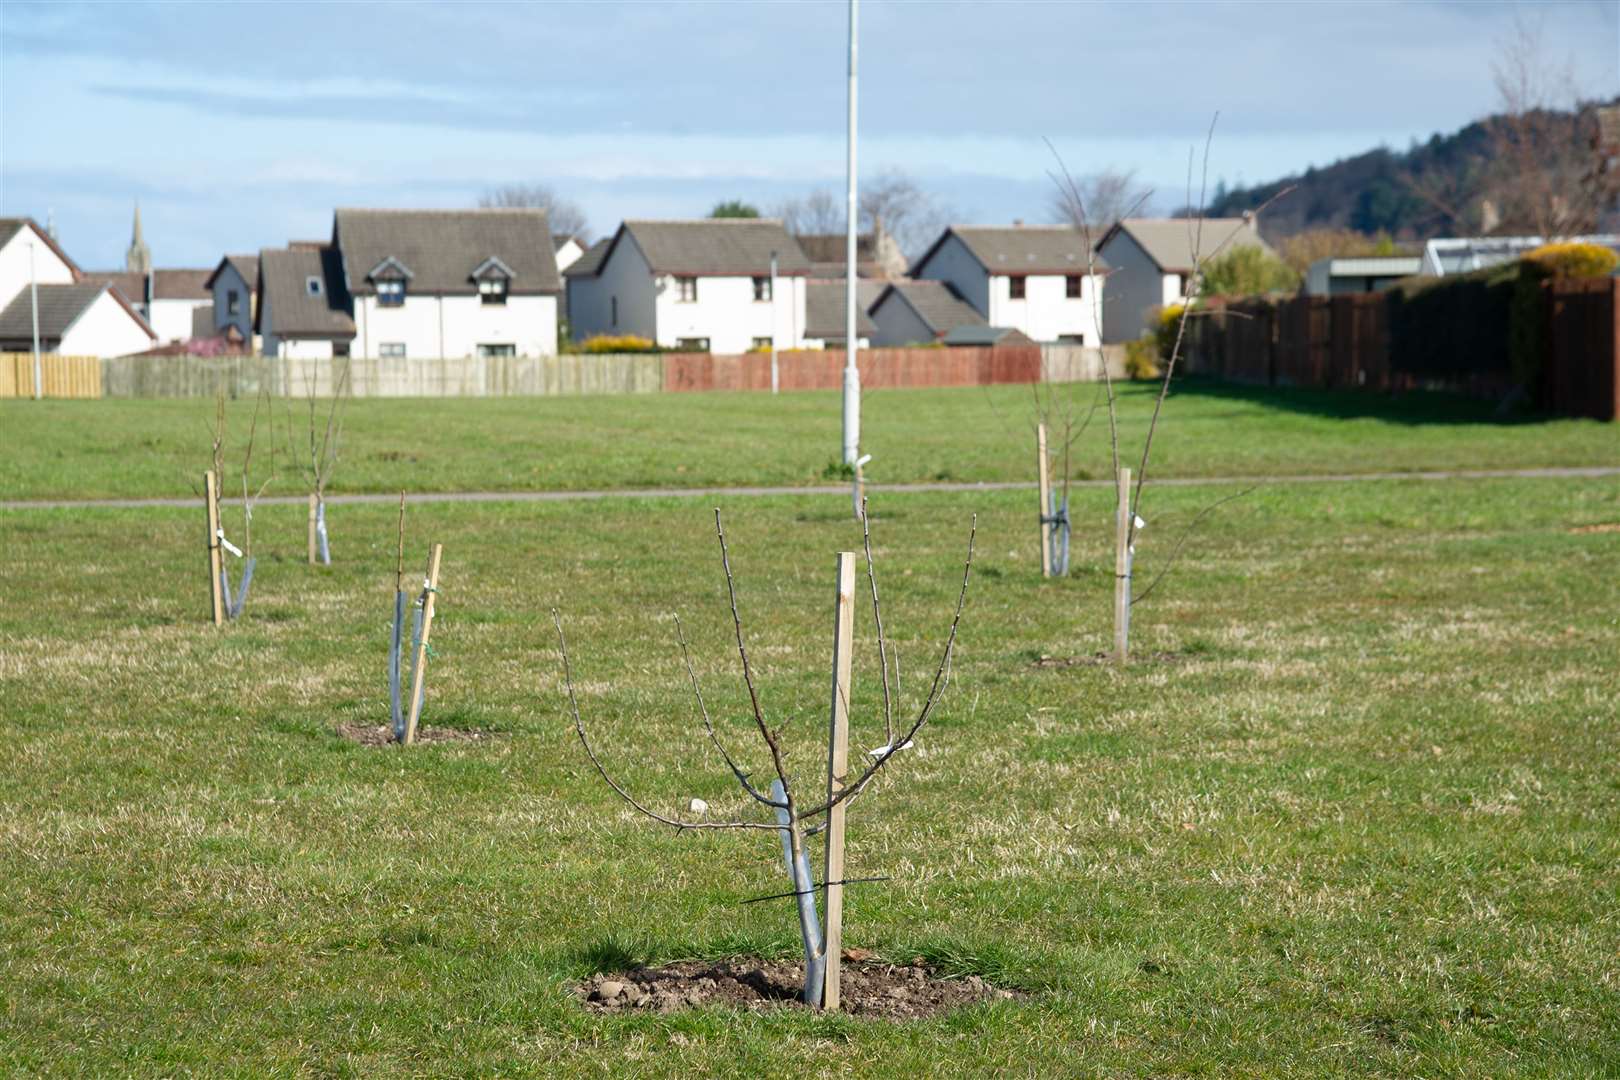 The fruit orchard at Mannachie Park was planted in March, 2019. Picture: Daniel Forsyth